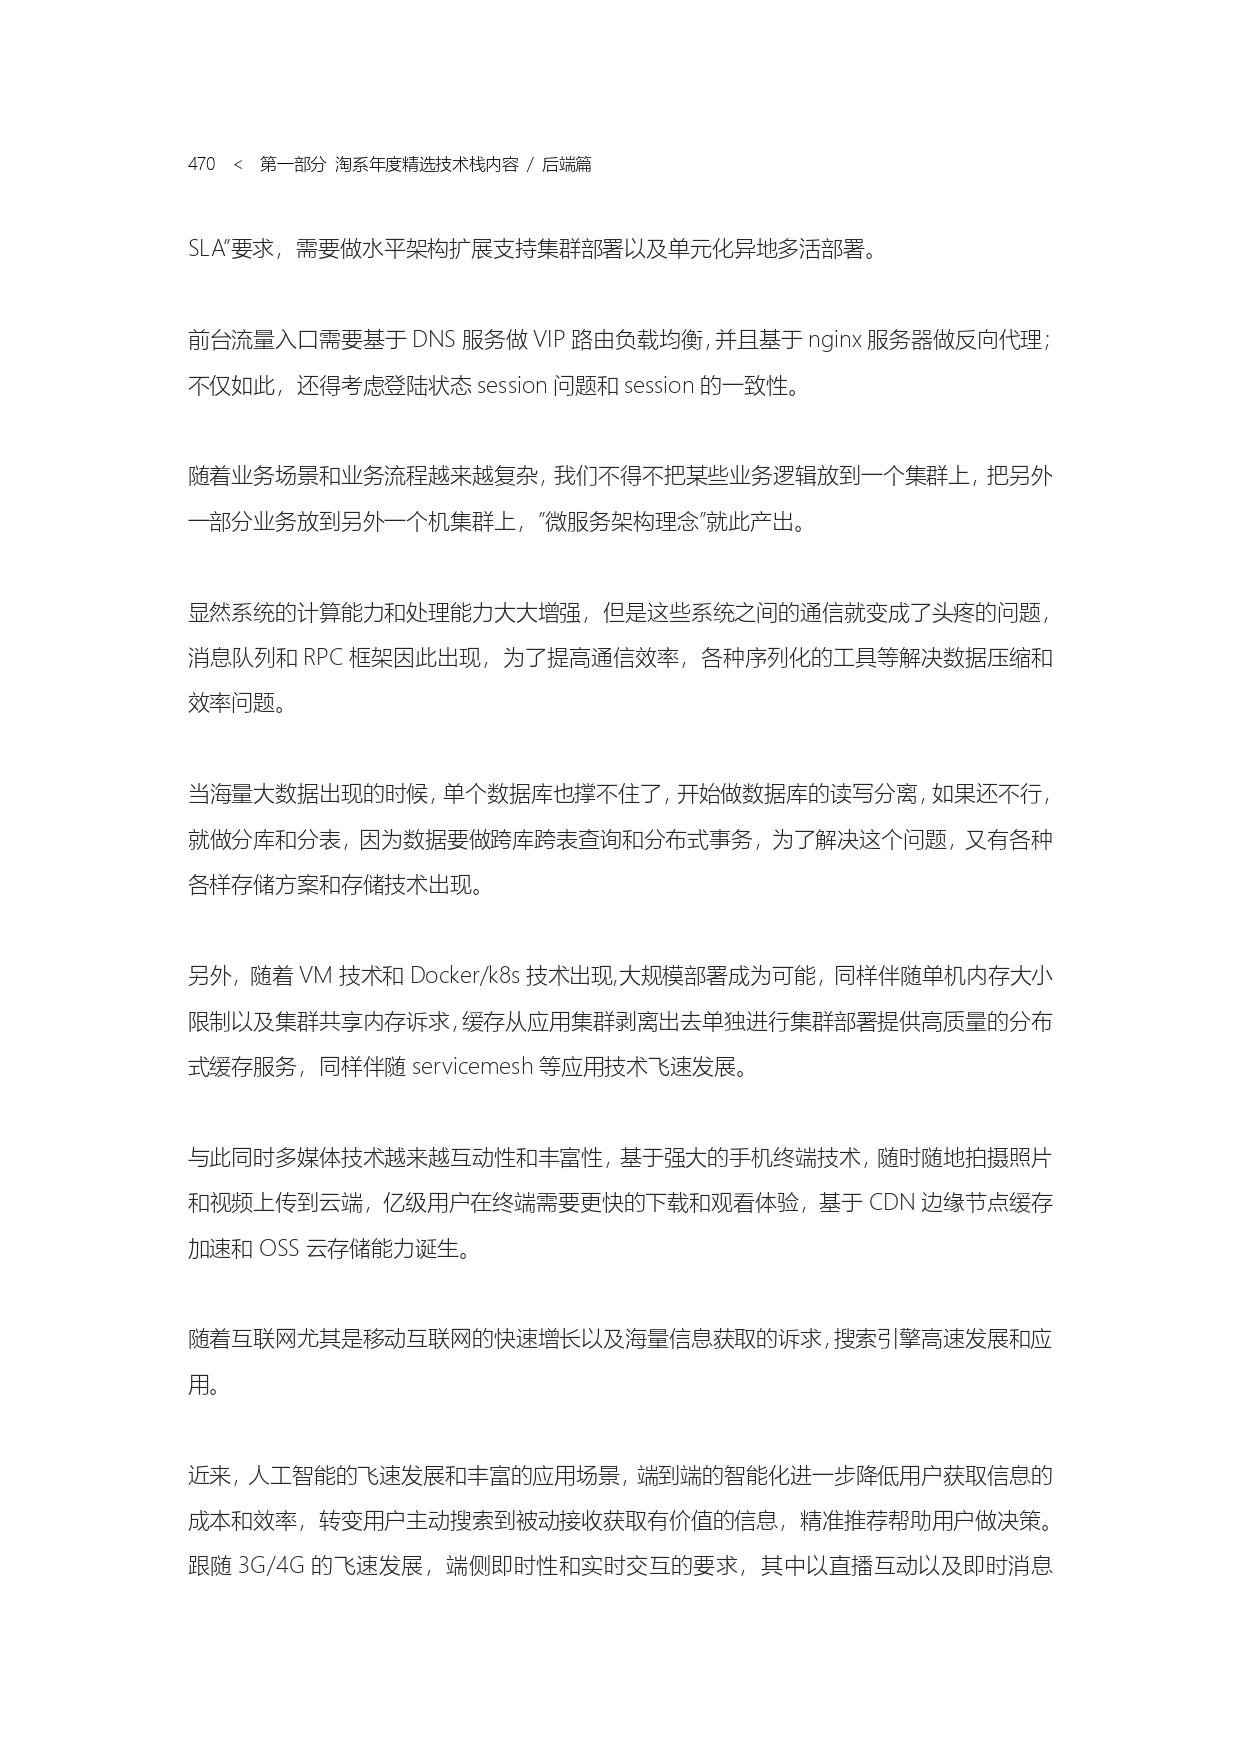 The Complete Works of Tao Technology 2020-1-570_page-0470.jpg